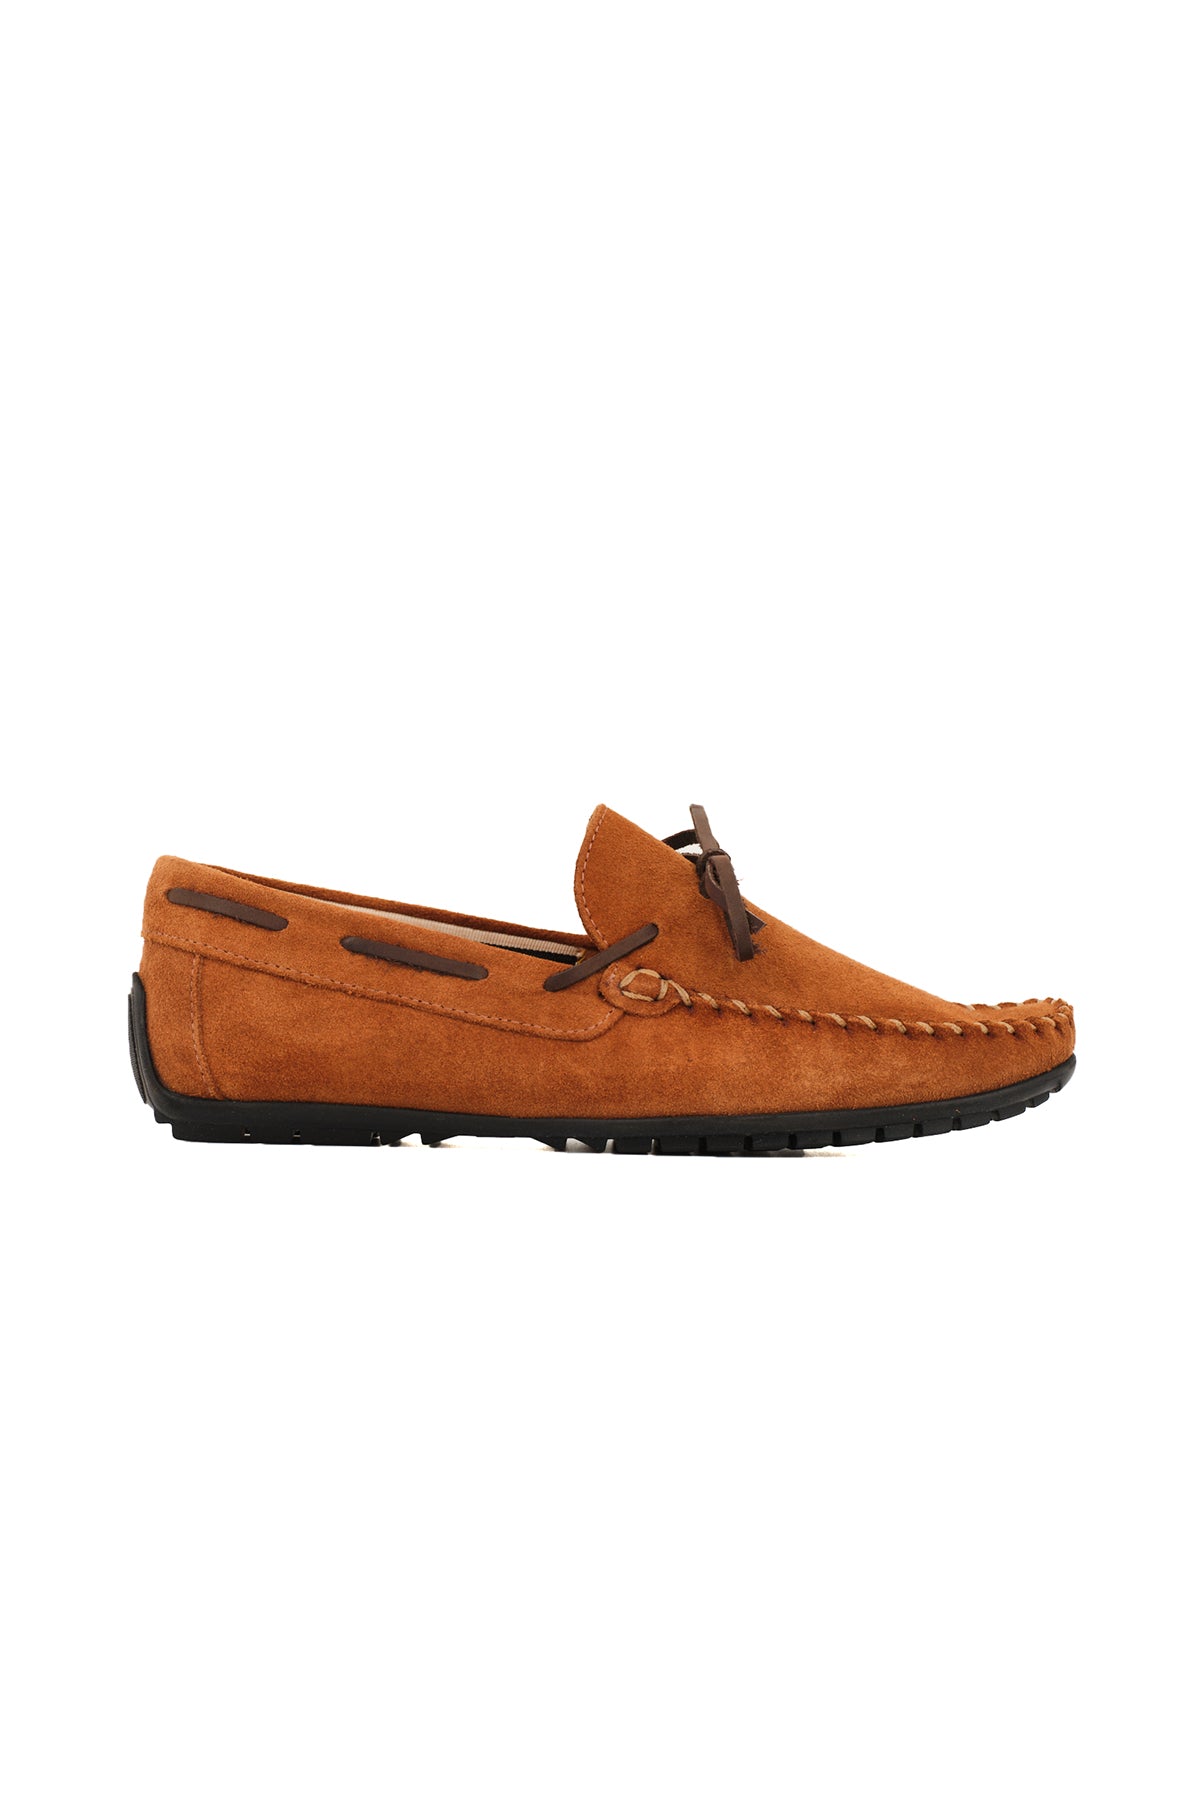 SUEDE CAR LOAFERS ΚΑΜΗΛΟ.